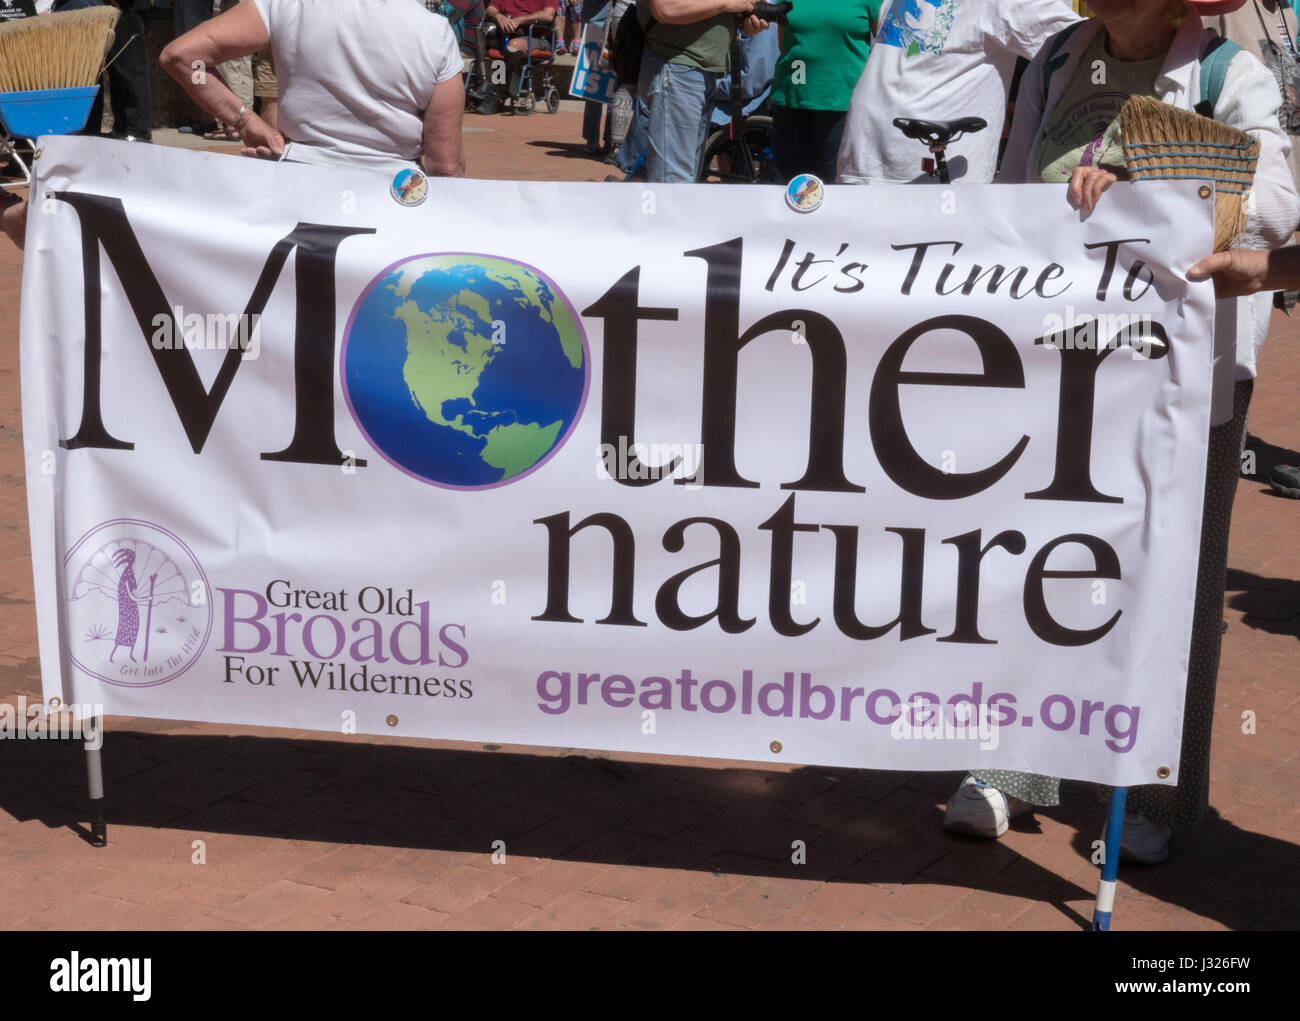 Great Old Broads for Wilderness banner at People's Climate March in America, Tucson, Arizona, USA. Stock Photo